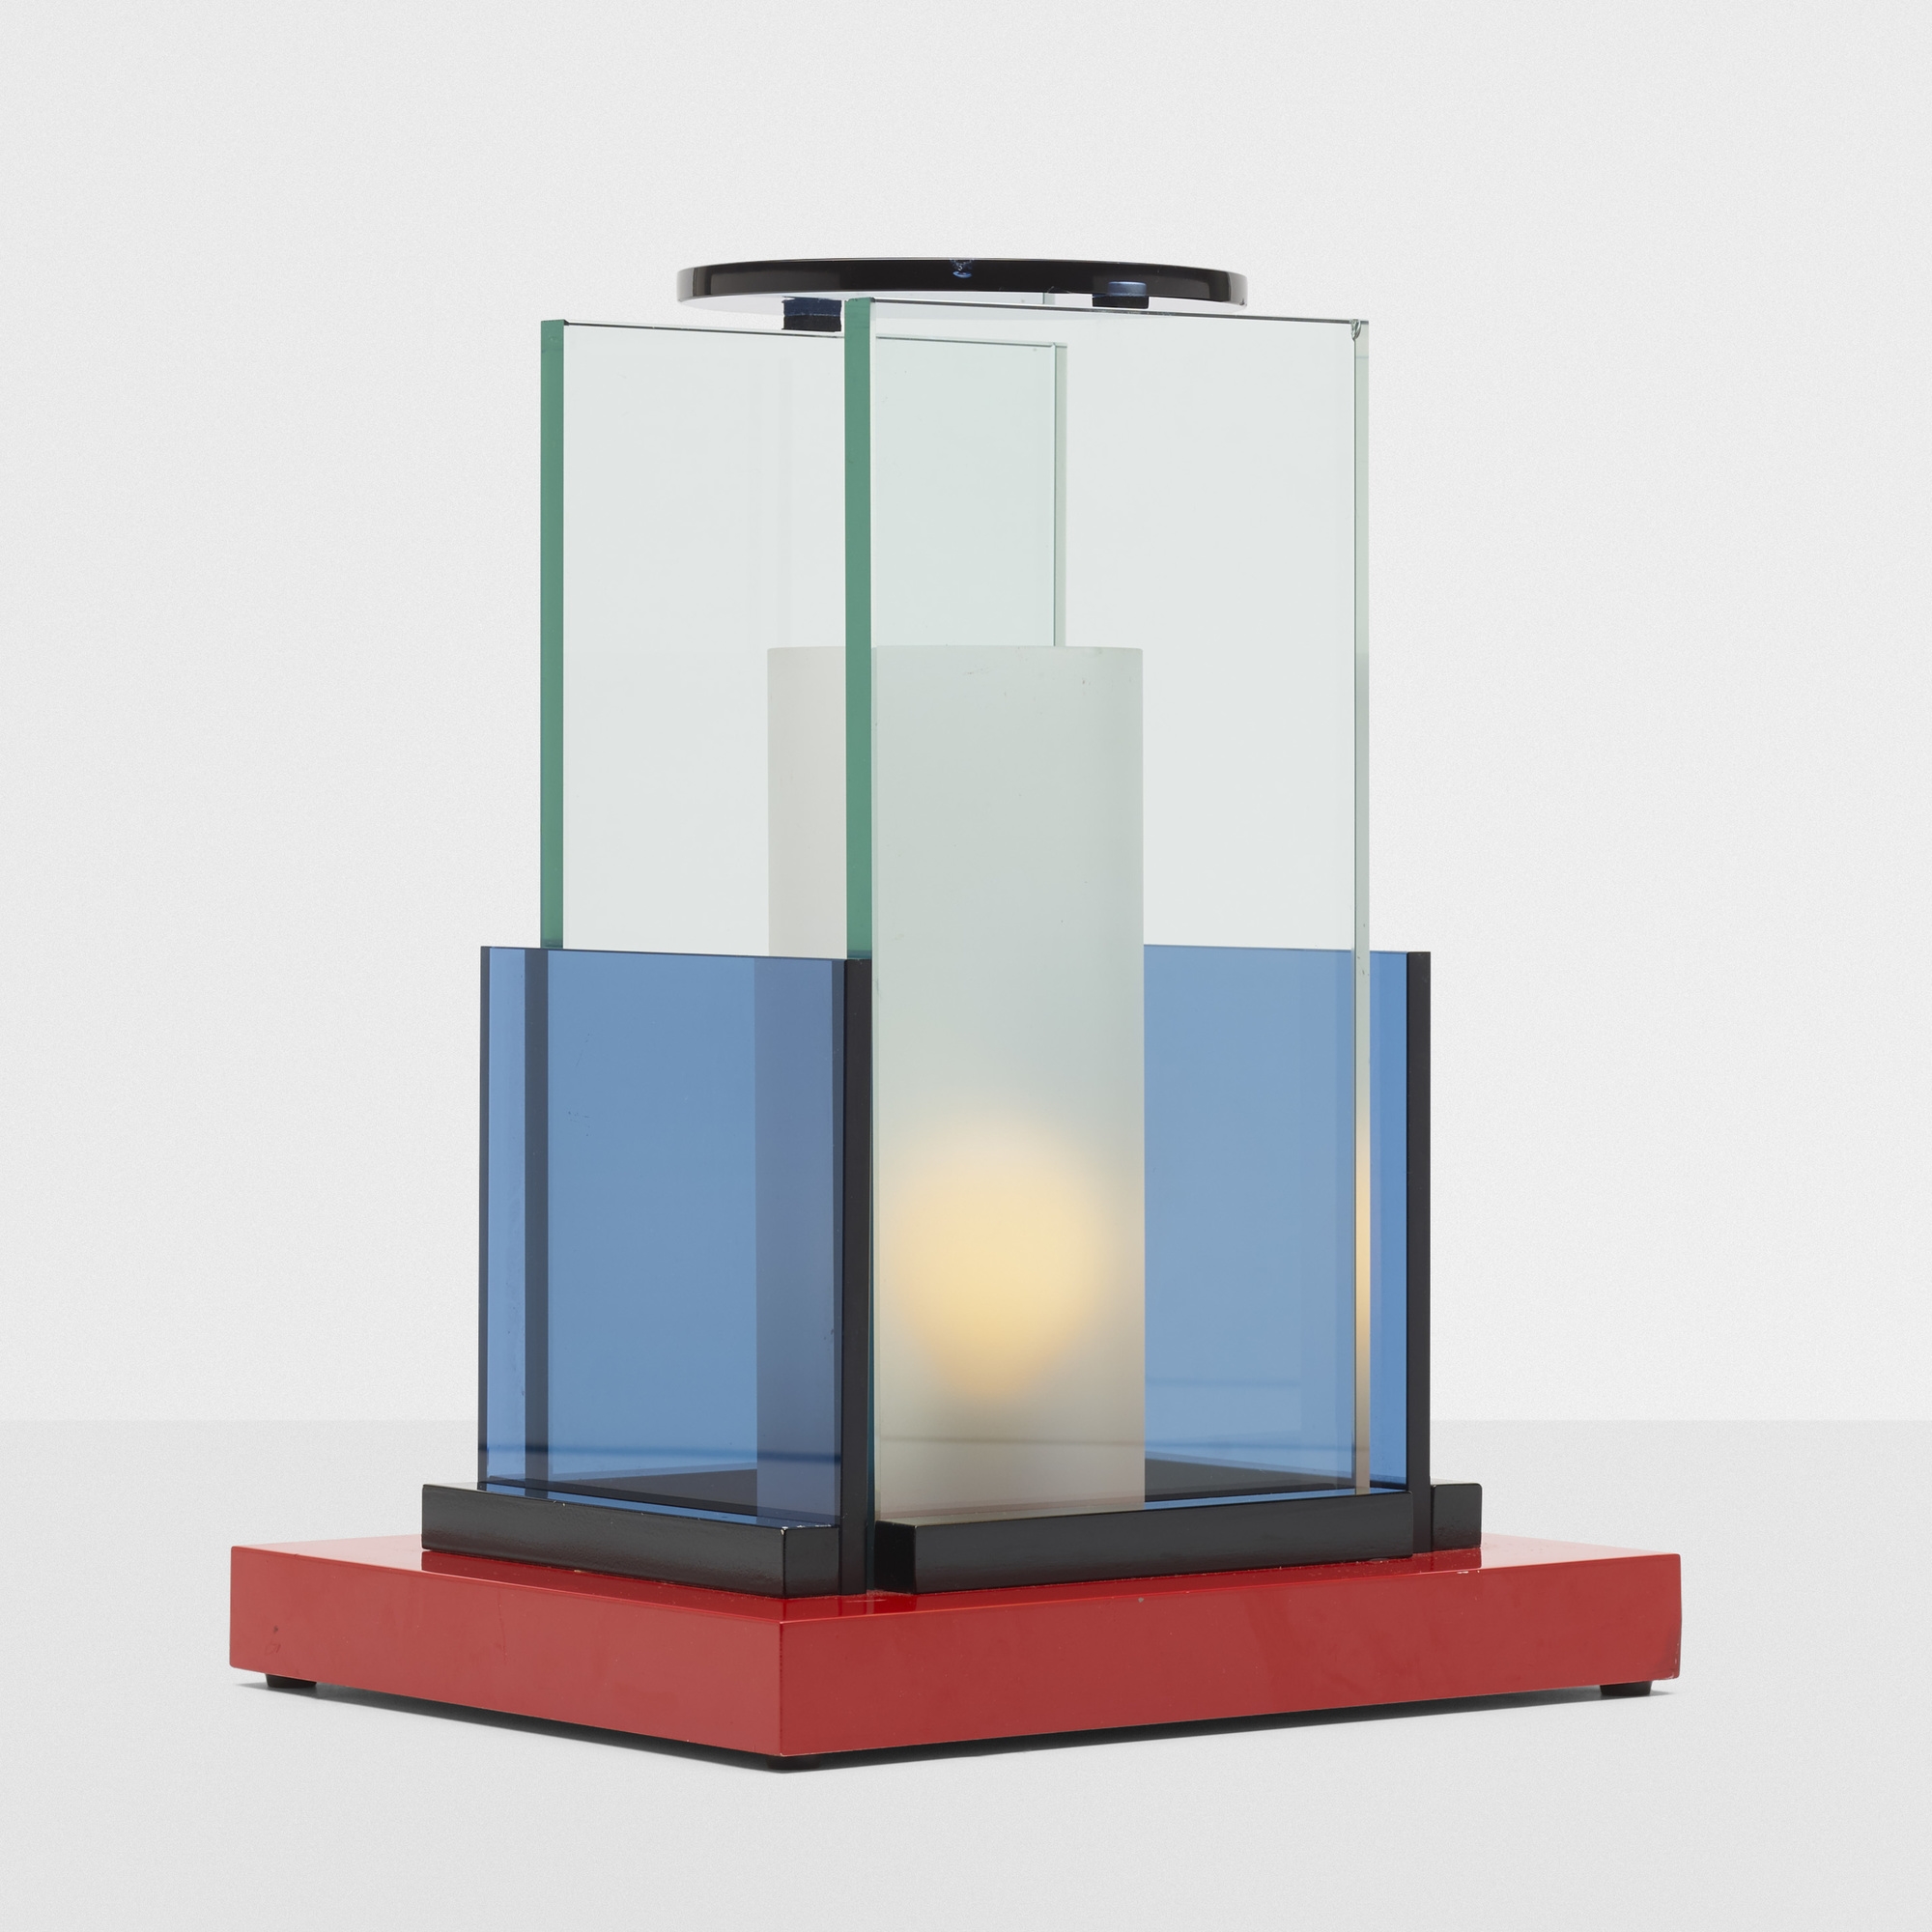 Olympia table lamp by Martine Bedin, 1985